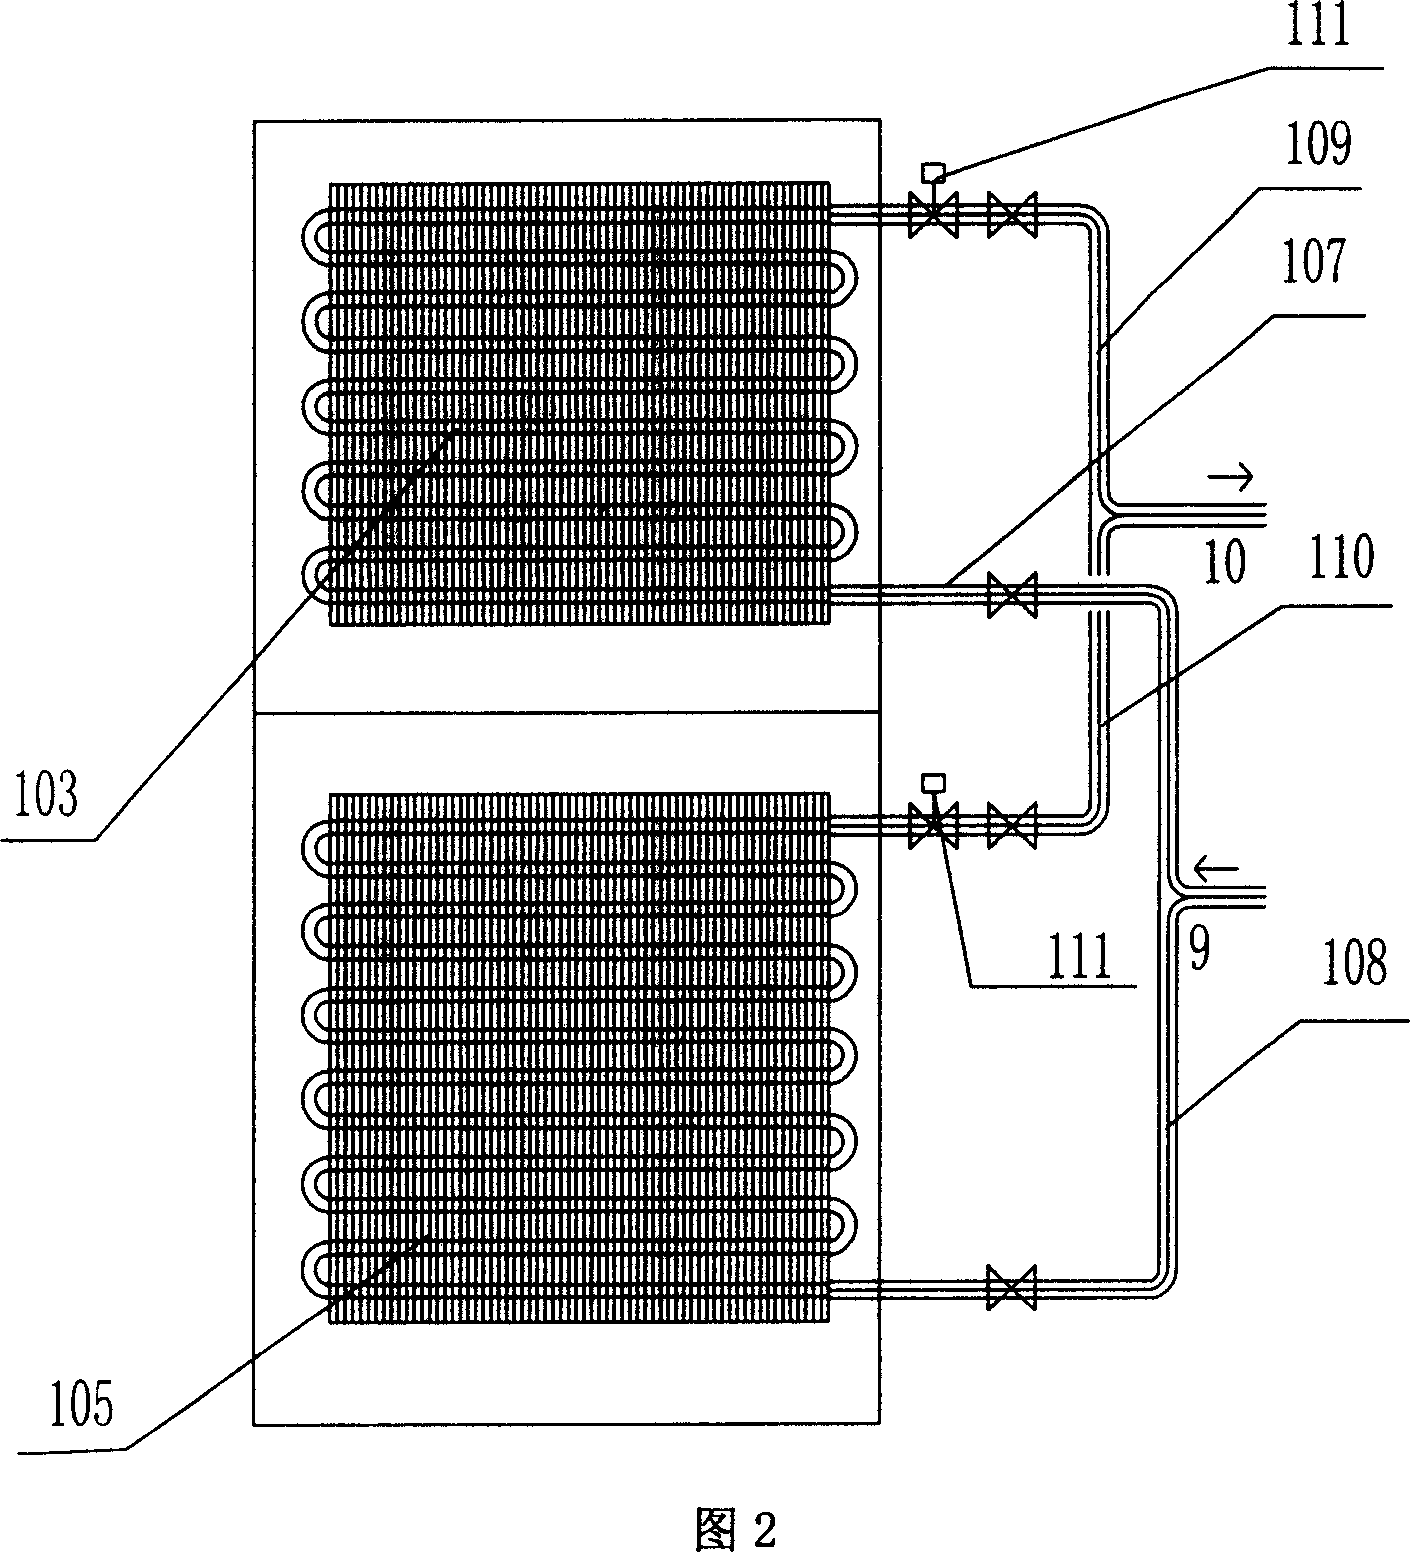 Method for realizing certain fresh-air quantity temperature regulation at end pant of air-conditioning system and VAN air-conditioner system with centain fresh-air quantity